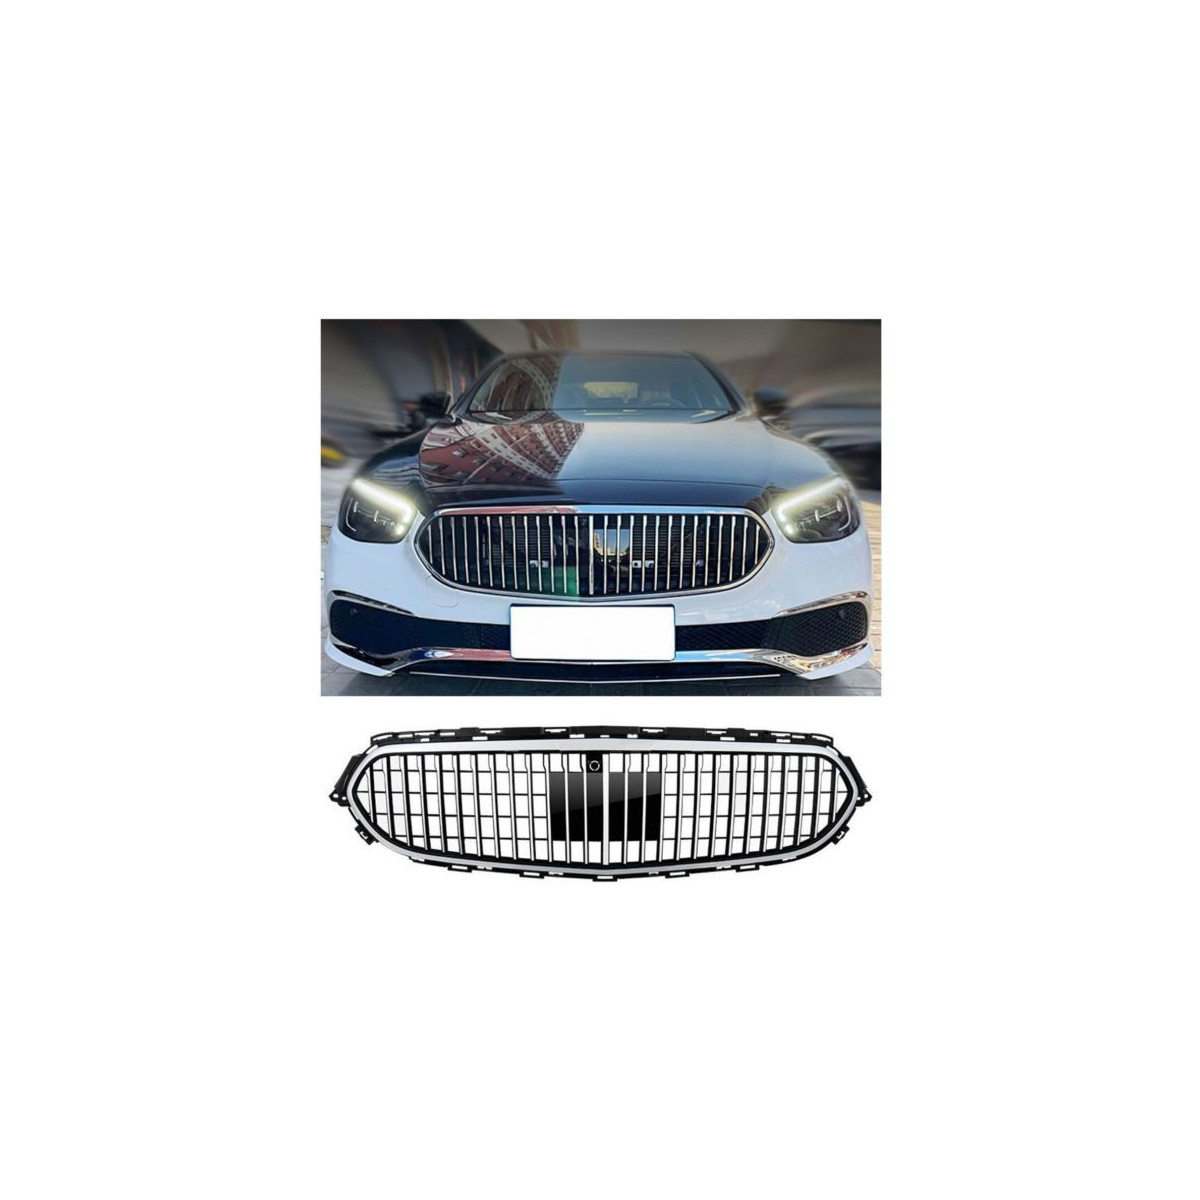 GRILL MERCEDESW W213 FACELIFT IN MAYBACH